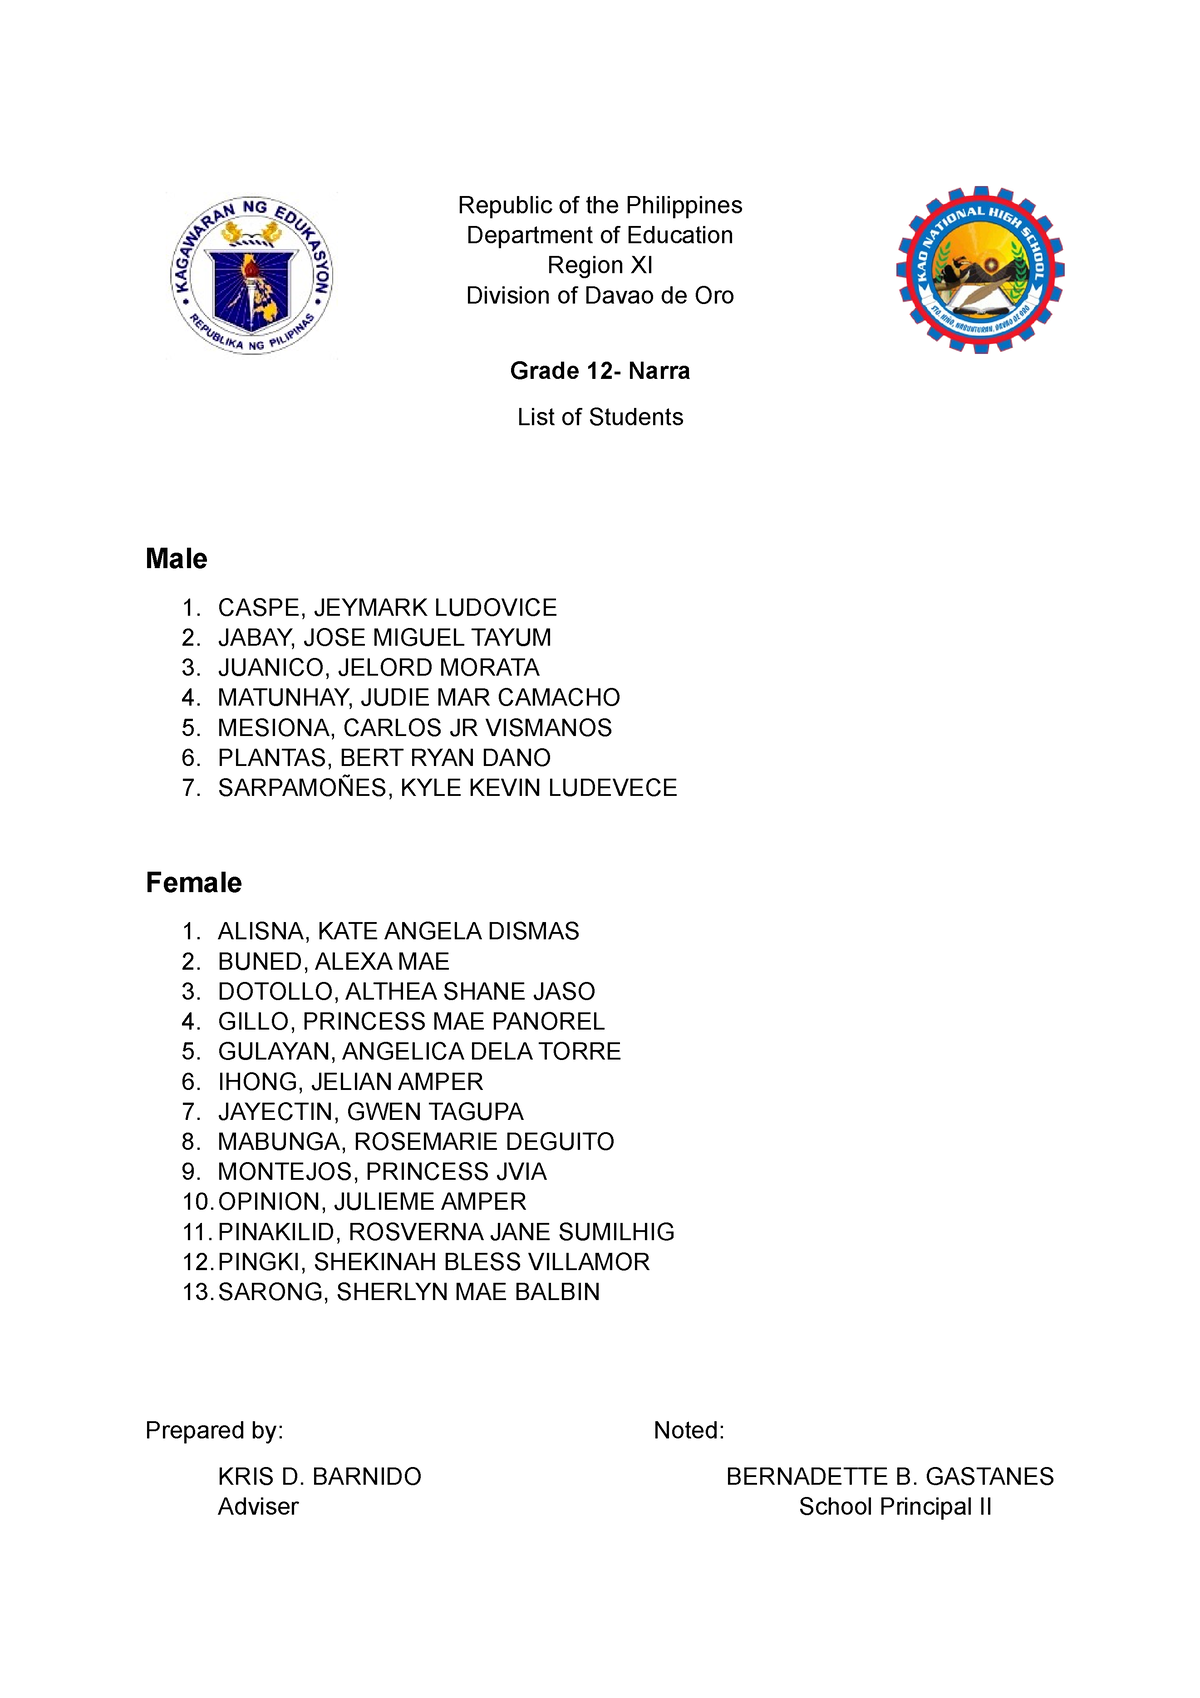 GAS Class LIST - Republic of the Philippines Department of Education ...